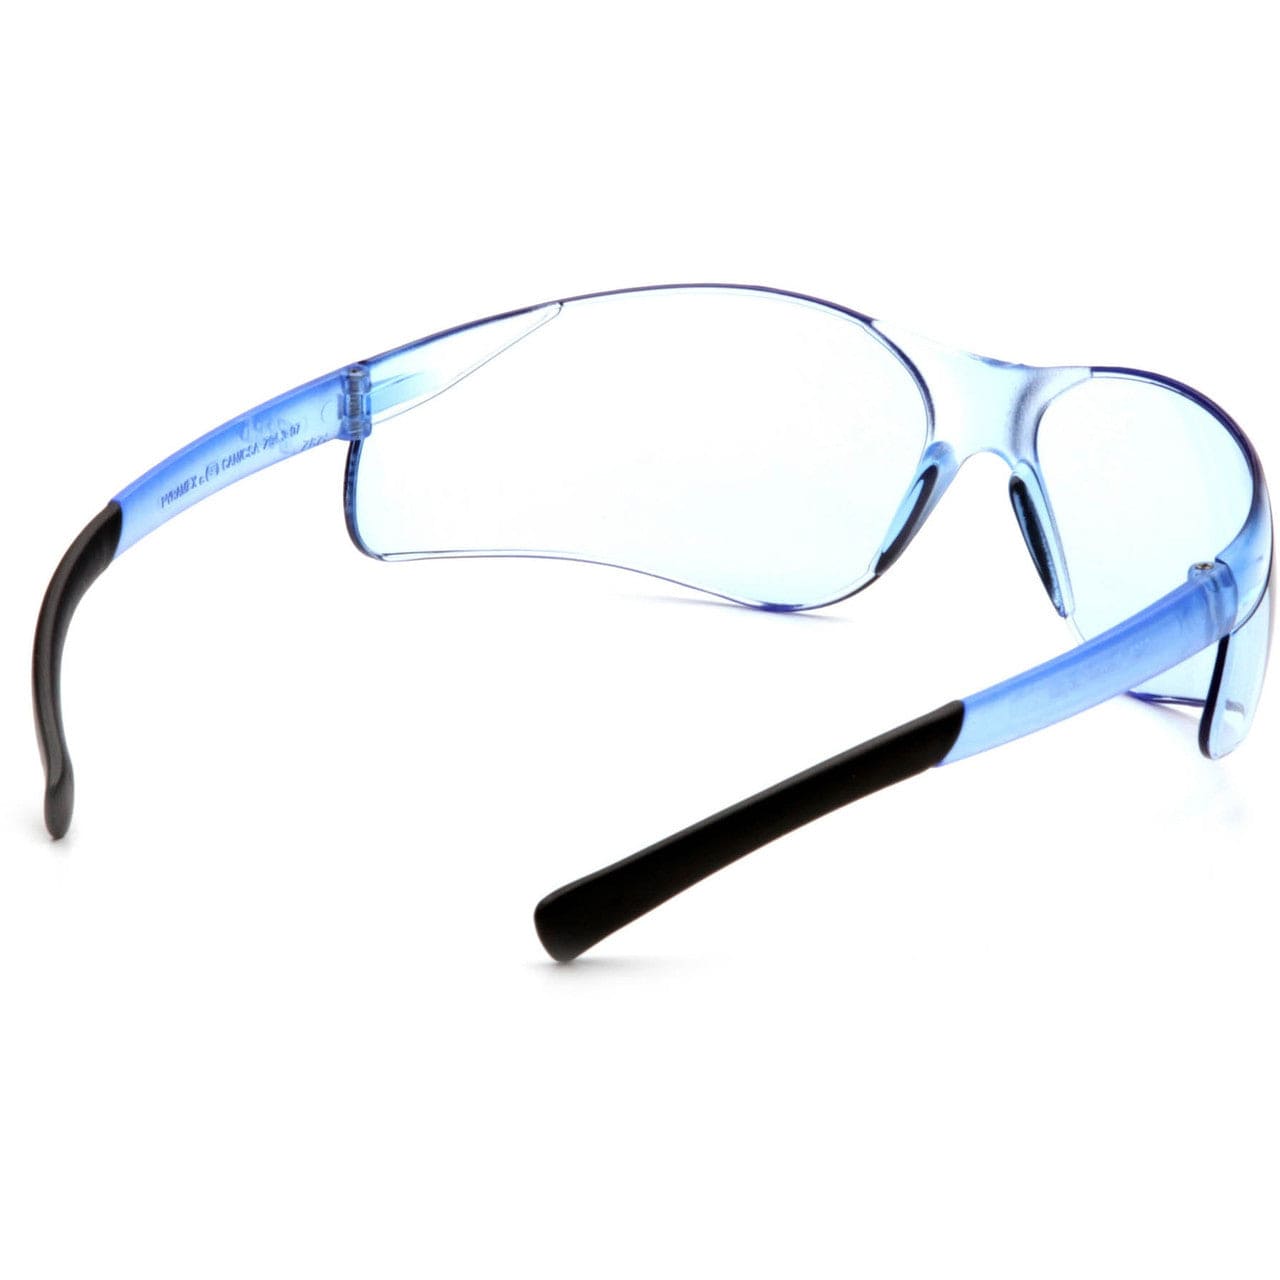 Pyramex Ztek Safety Glasses with Infinity Blue Lens S2560S Inside View